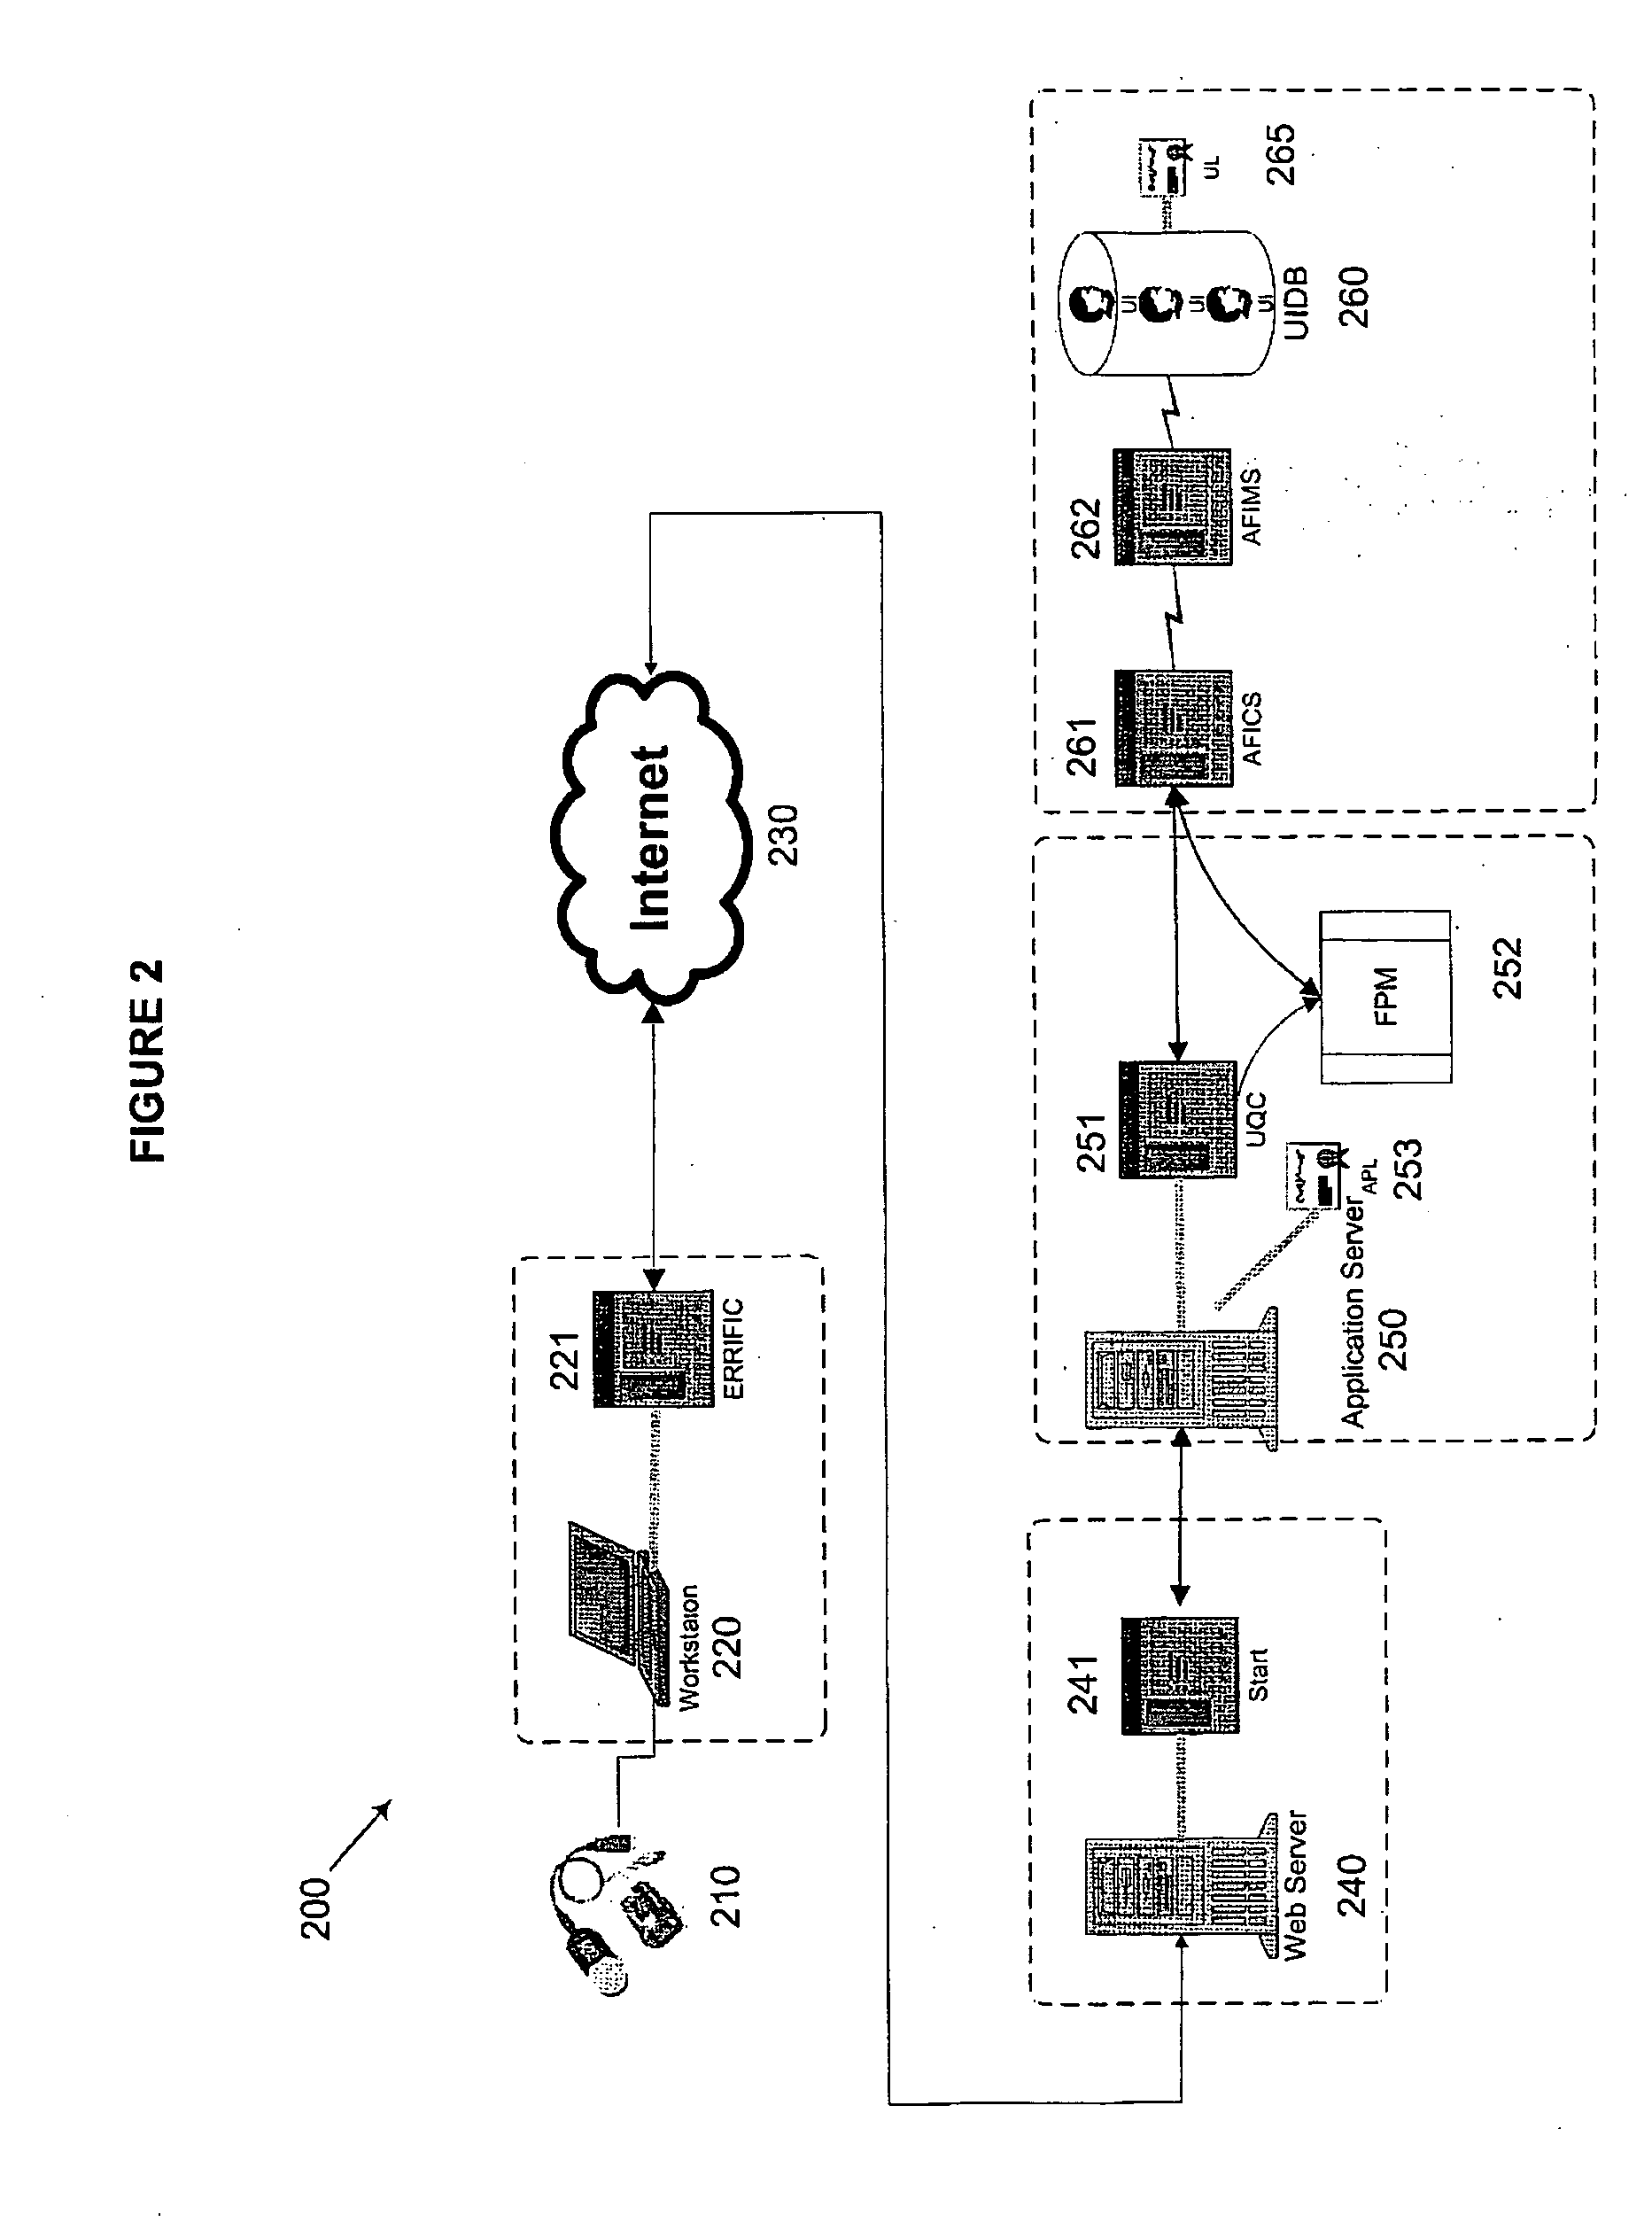 Method and system for secure transmission of biometric data